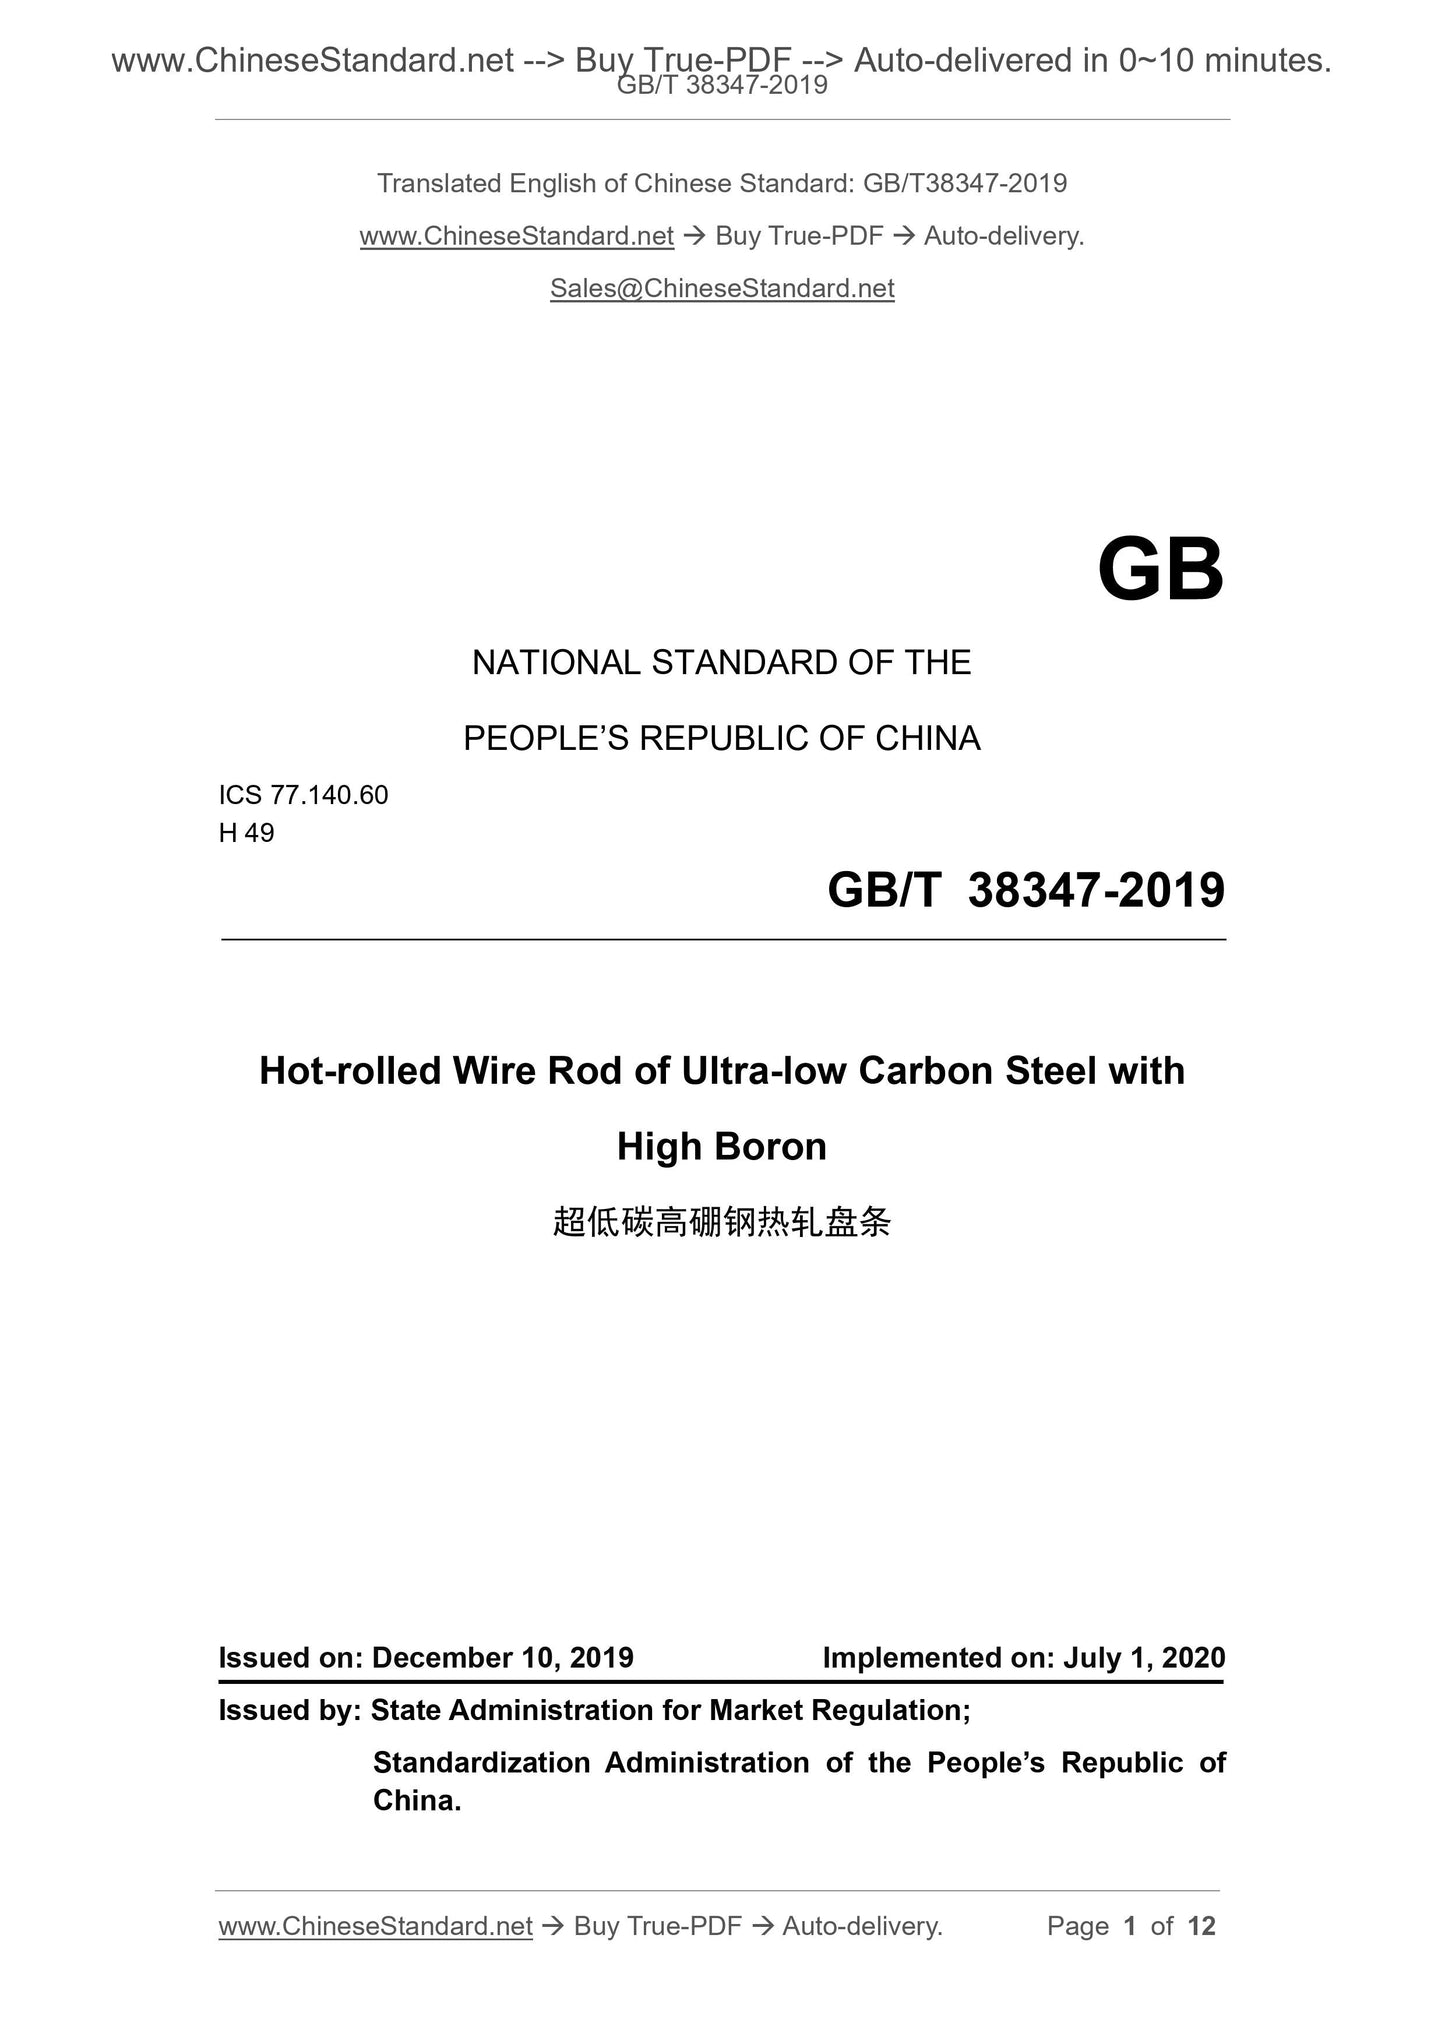 GB/T 38347-2019 Page 1